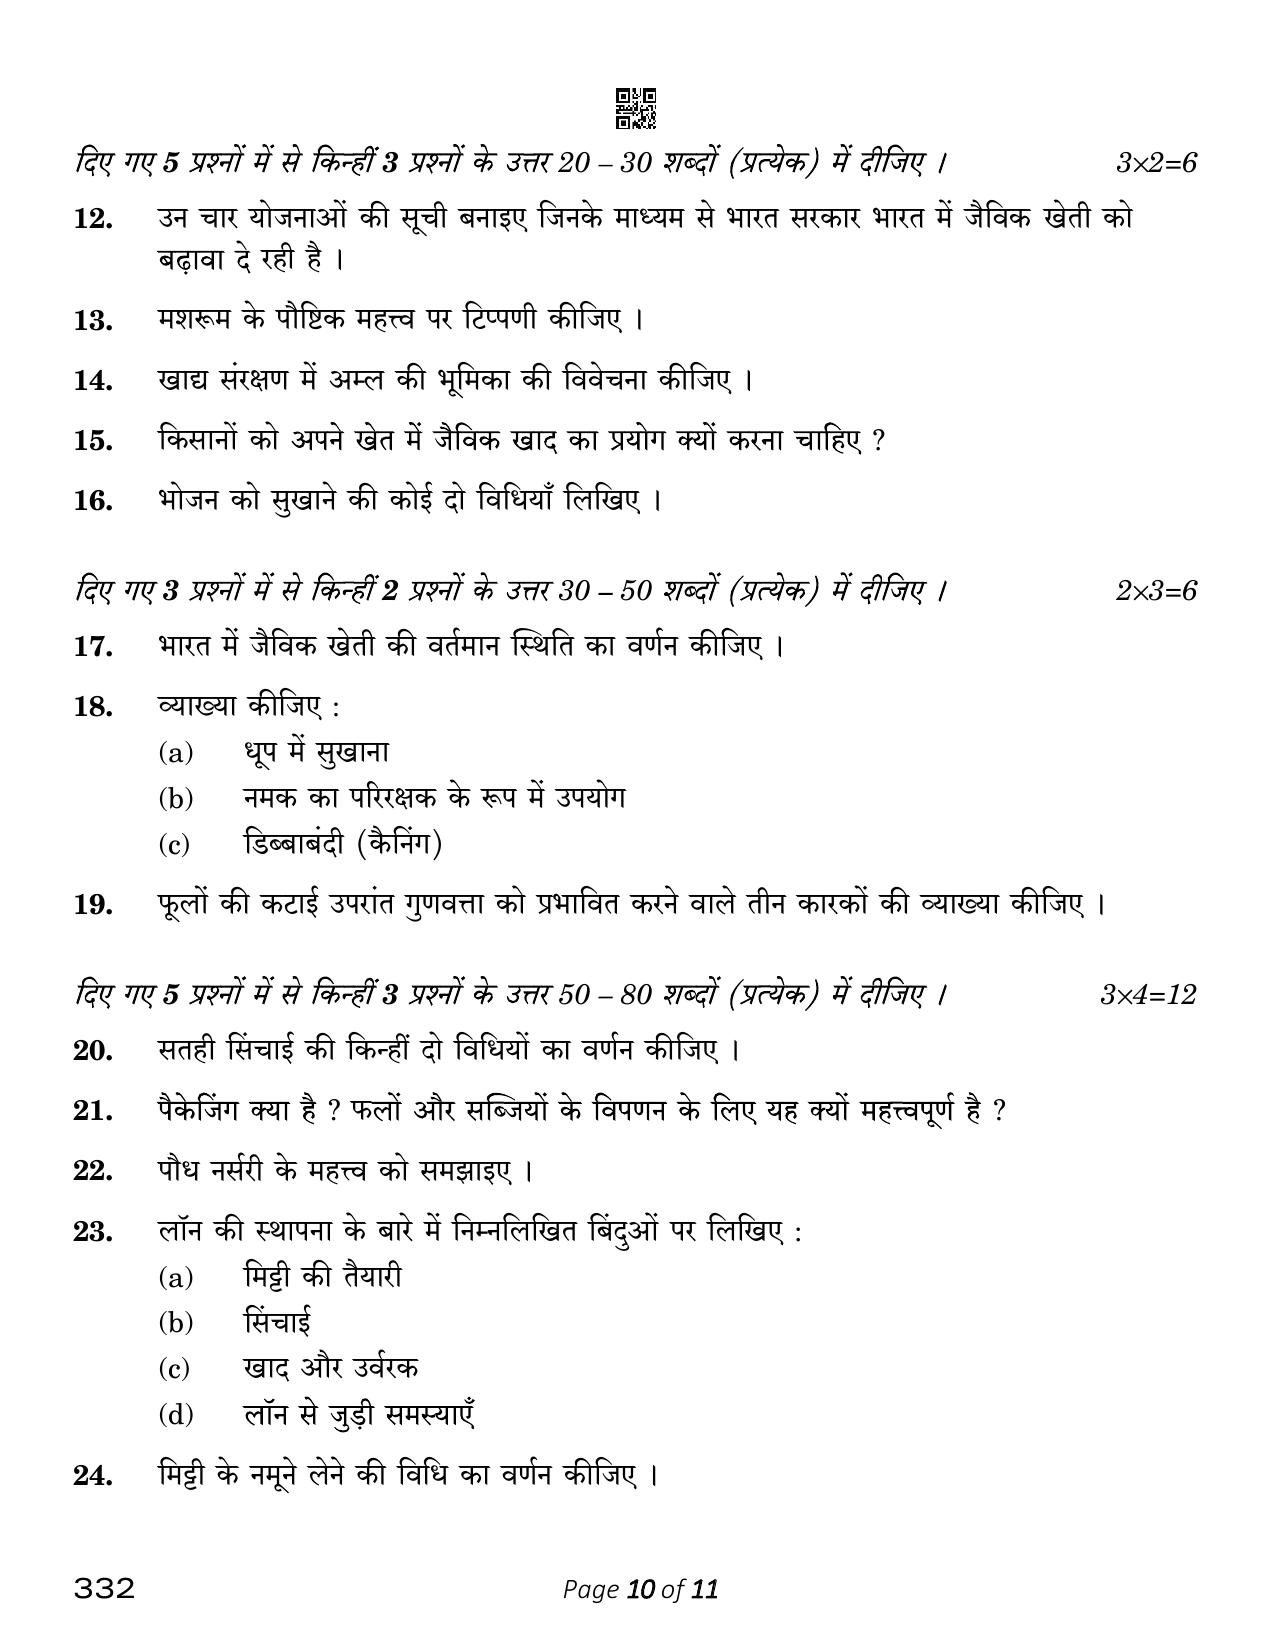 CBSE Class 12 Agriculture (Compartment) 2023 Question Paper - Page 10